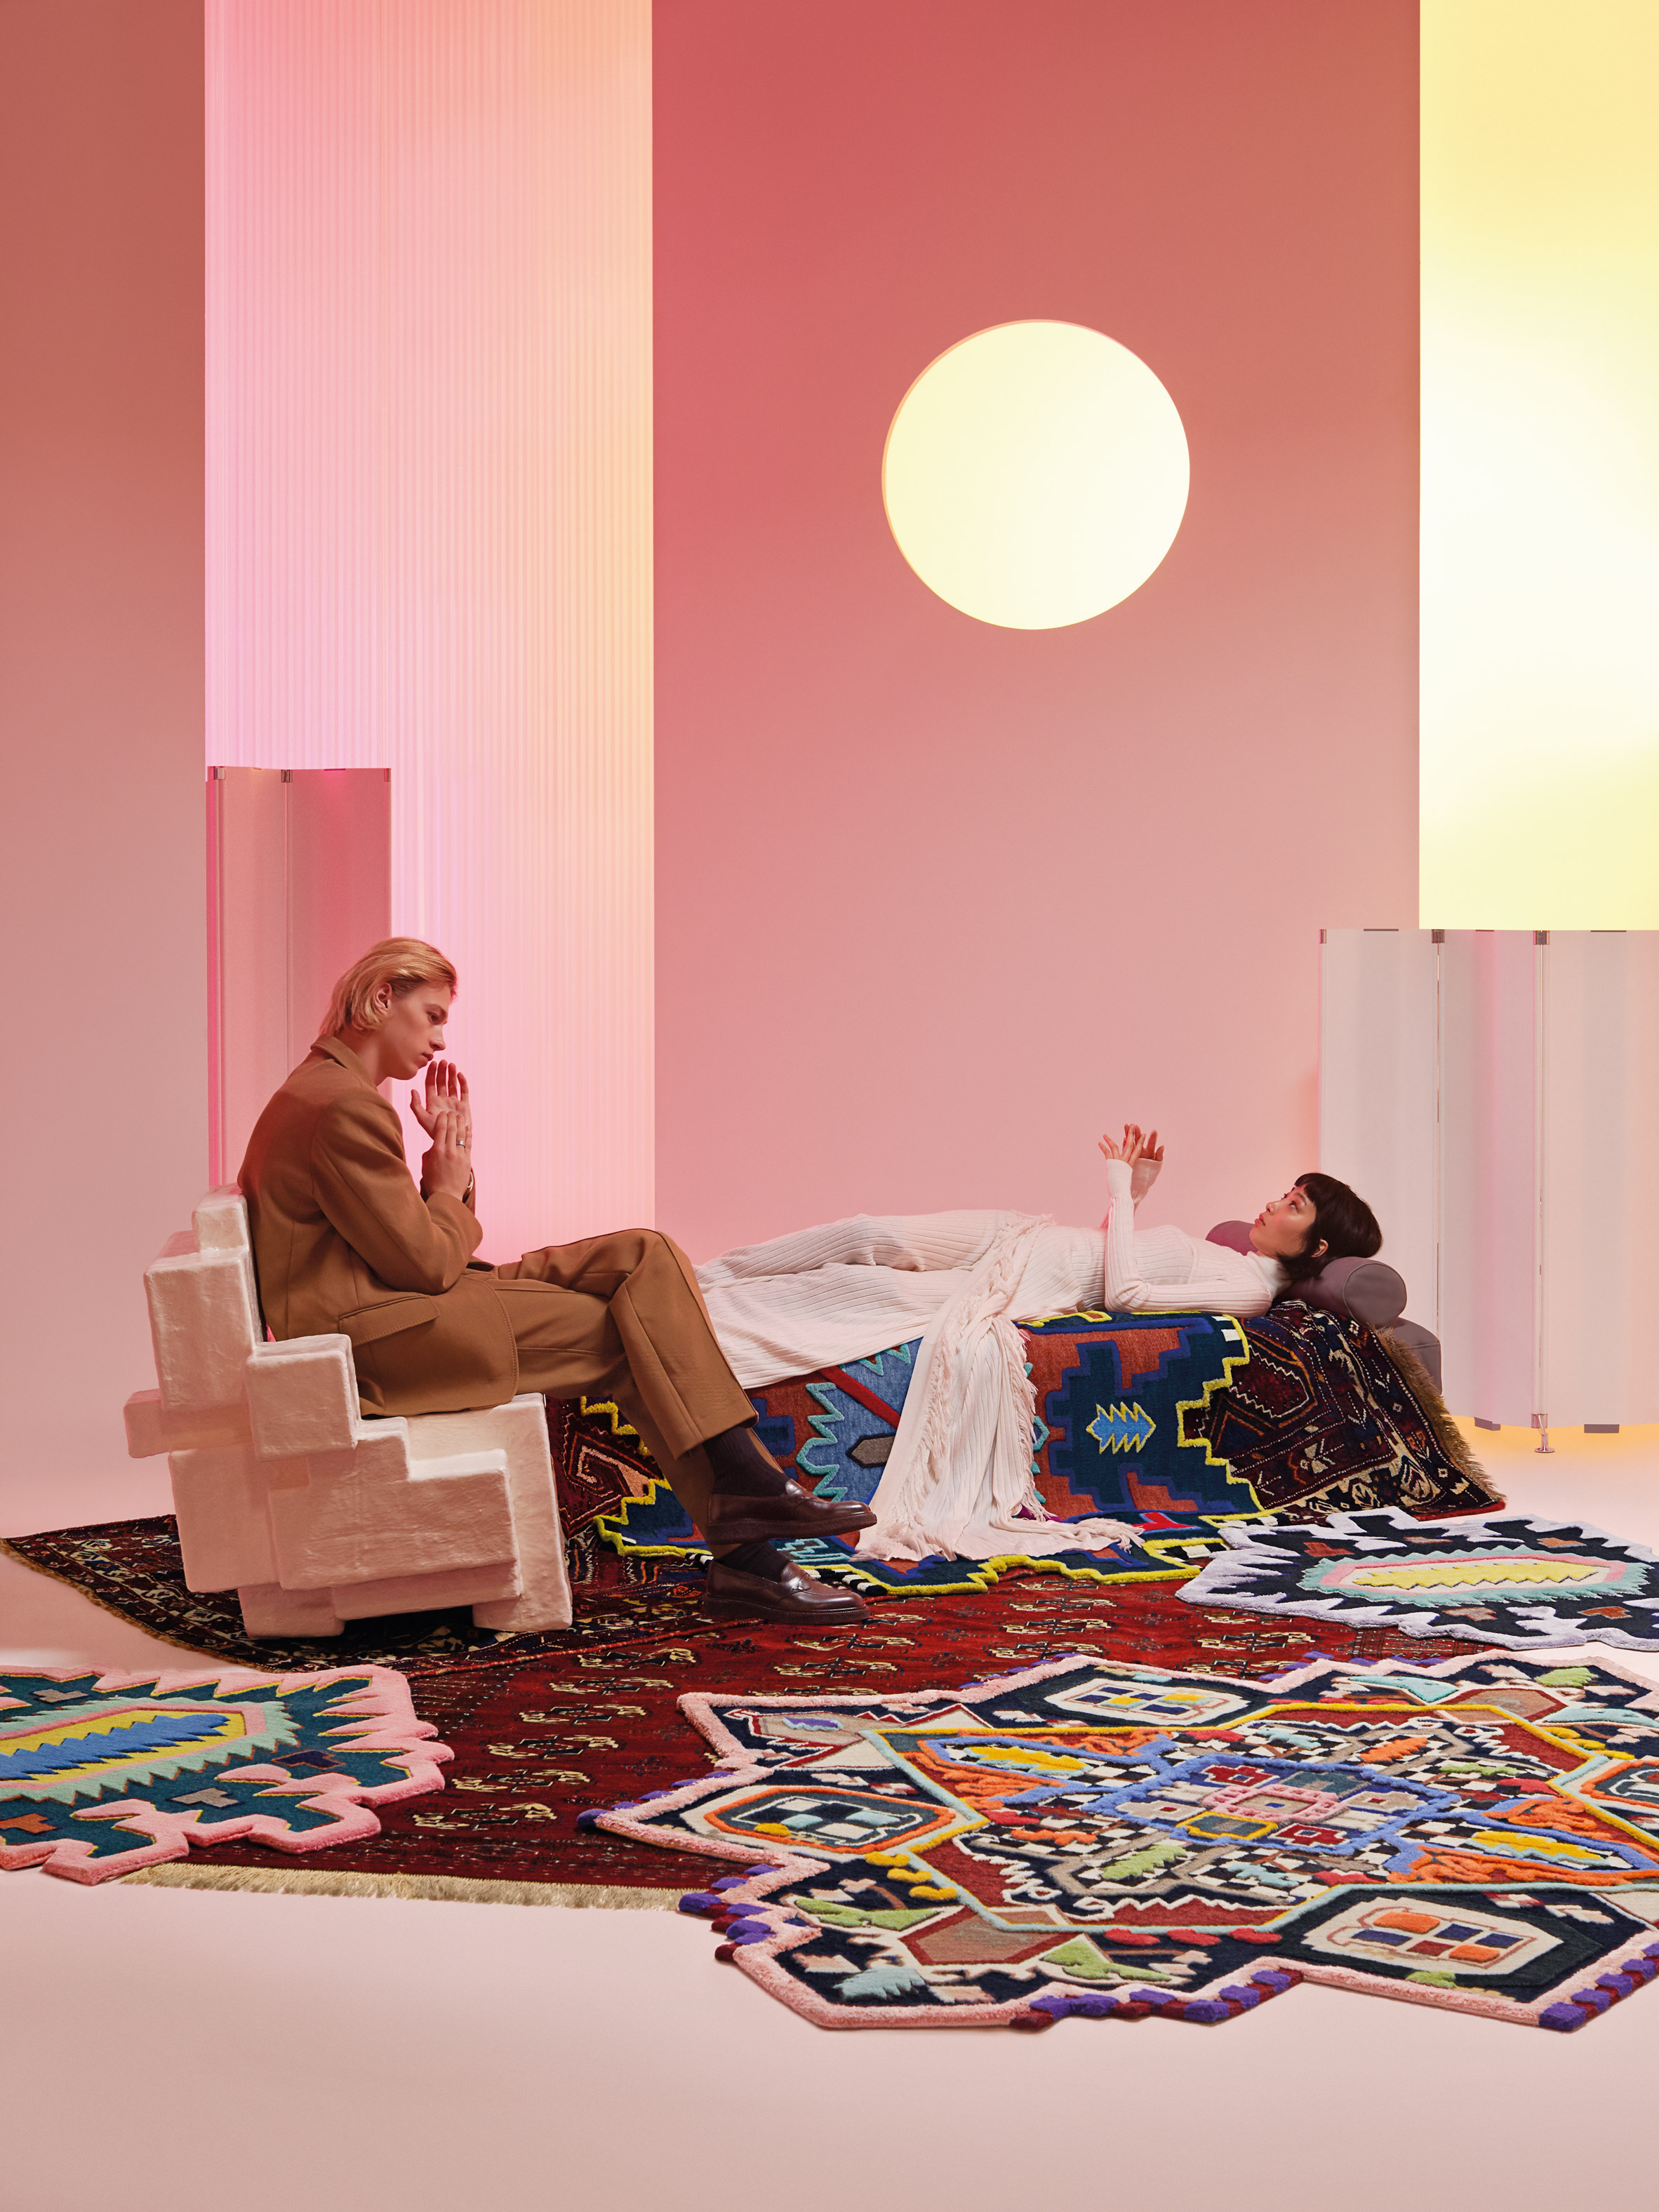 Rug invaders by the Cc-Tapis design-lab for the Spectrum catalogue. Photography is by Alessandro Oliva.